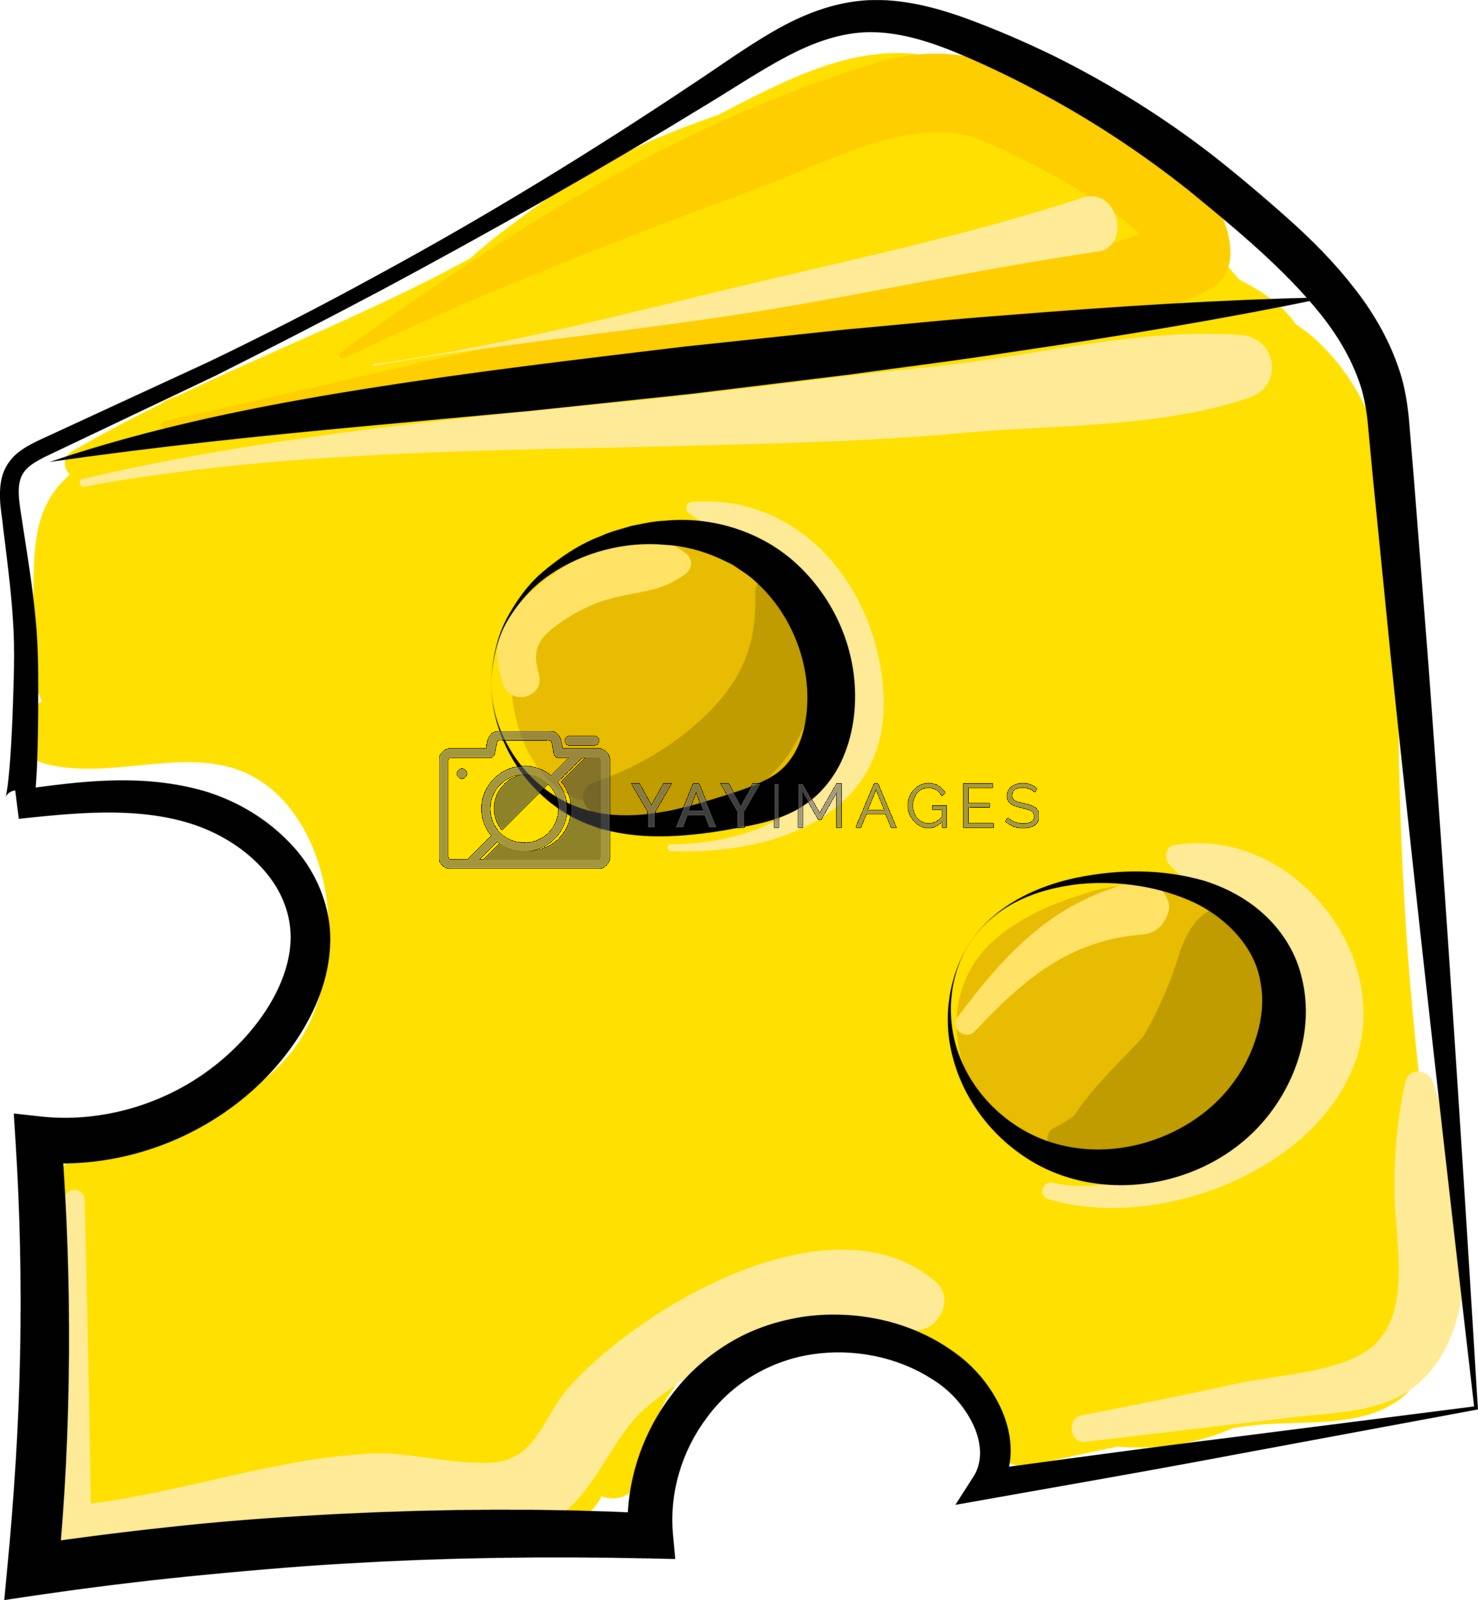 Royalty free image of Yellow cheese, illustration, vector on white background. by Morphart